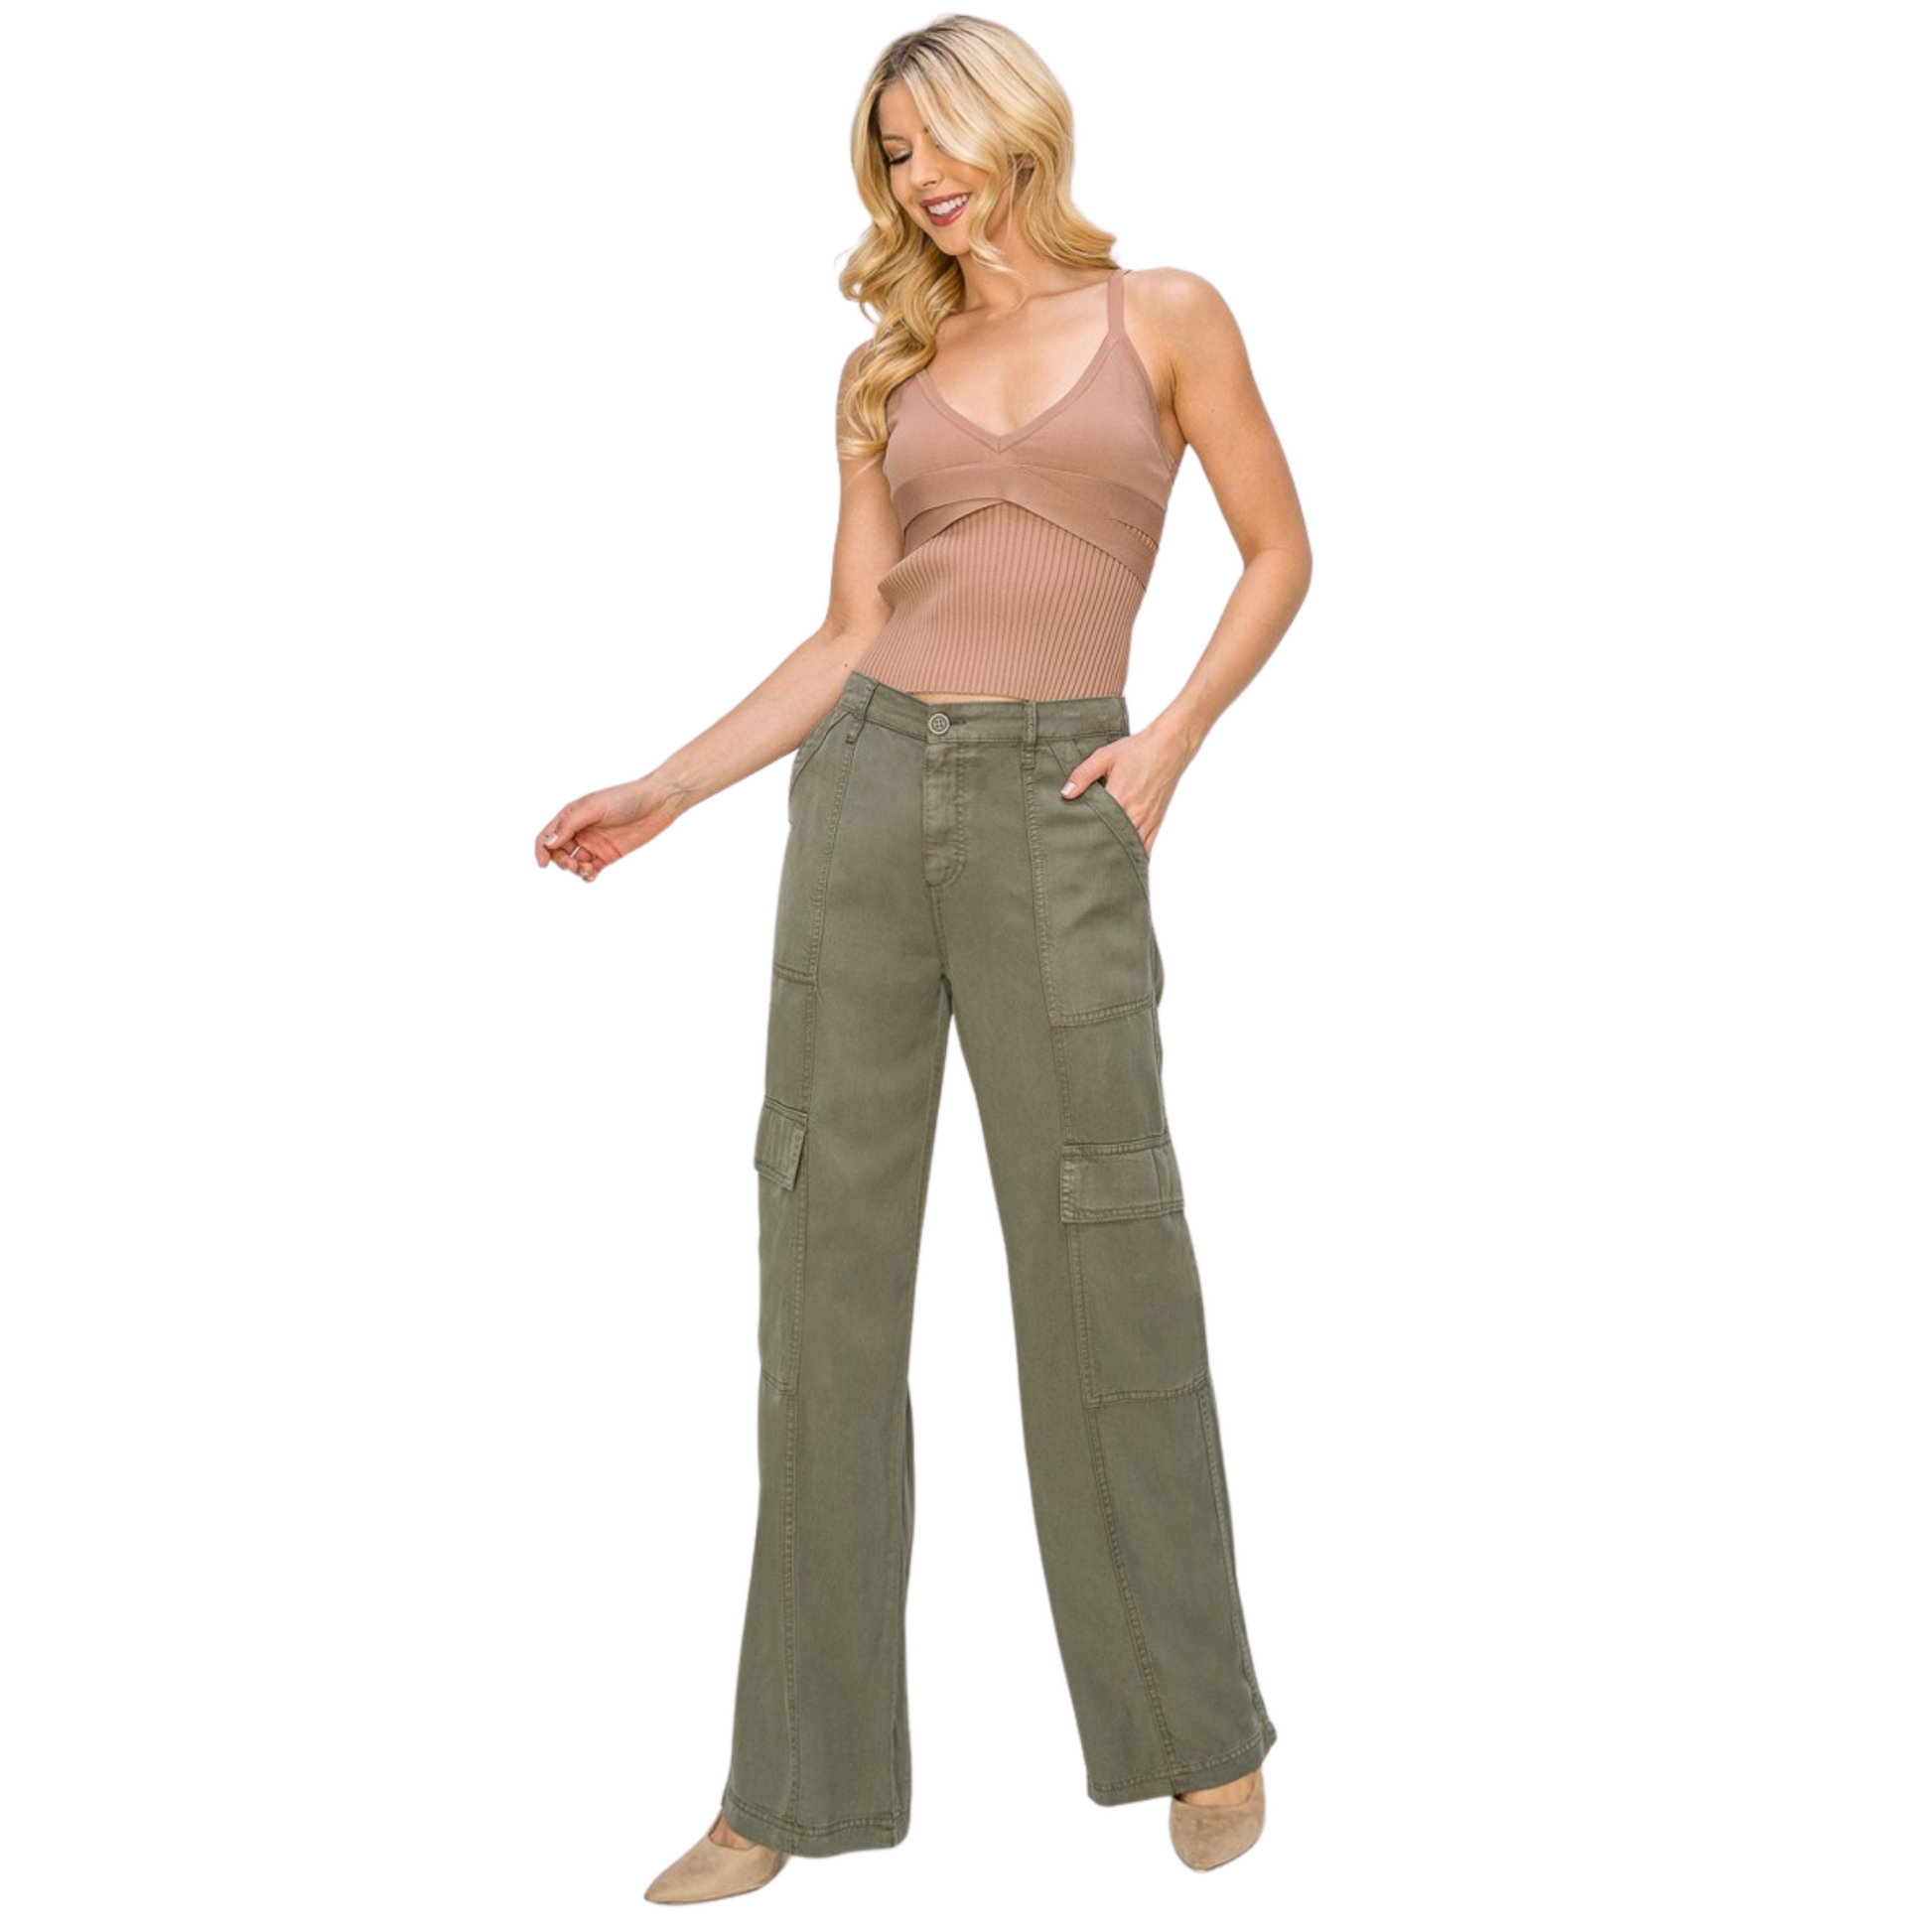 Expertly crafted with Tencel fabric, these olive cargo pants feature a wide leg design for a comfortable and stylish fit. Available in both regular and plus sizes, these pants are perfect for any occasion. Upgrade your wardrobe with these versatile and fashionable pants.